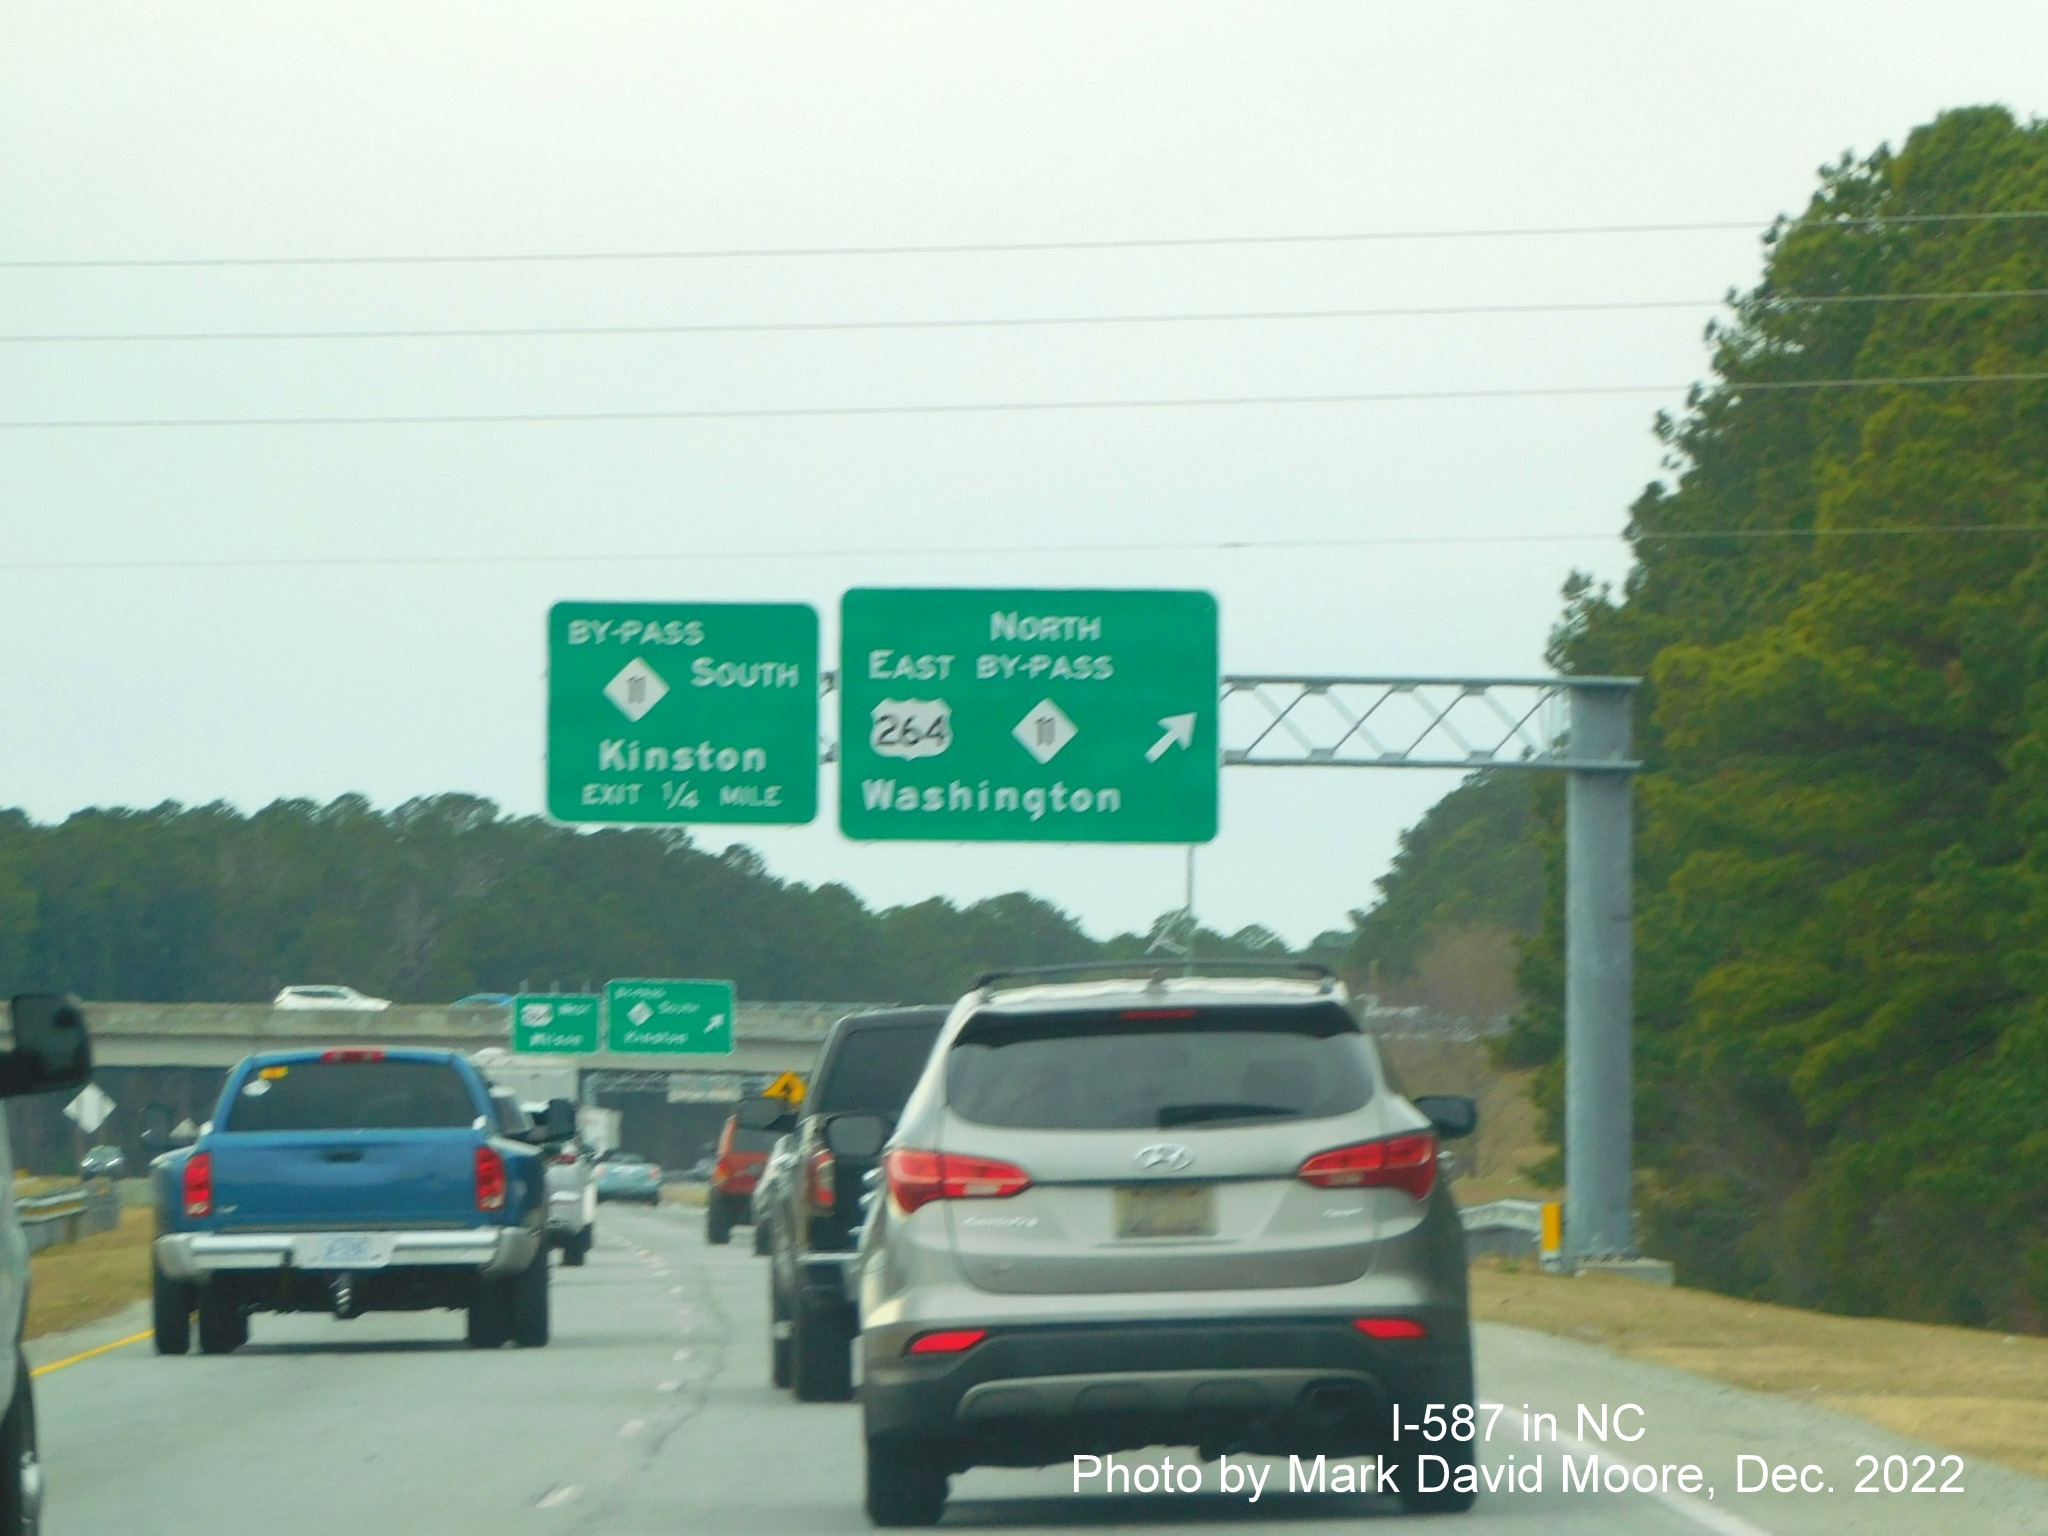 Image of overhead signage for US 264 West/NC 11 Bypass North in Greenville, photo by Mark David Moore, December 2022